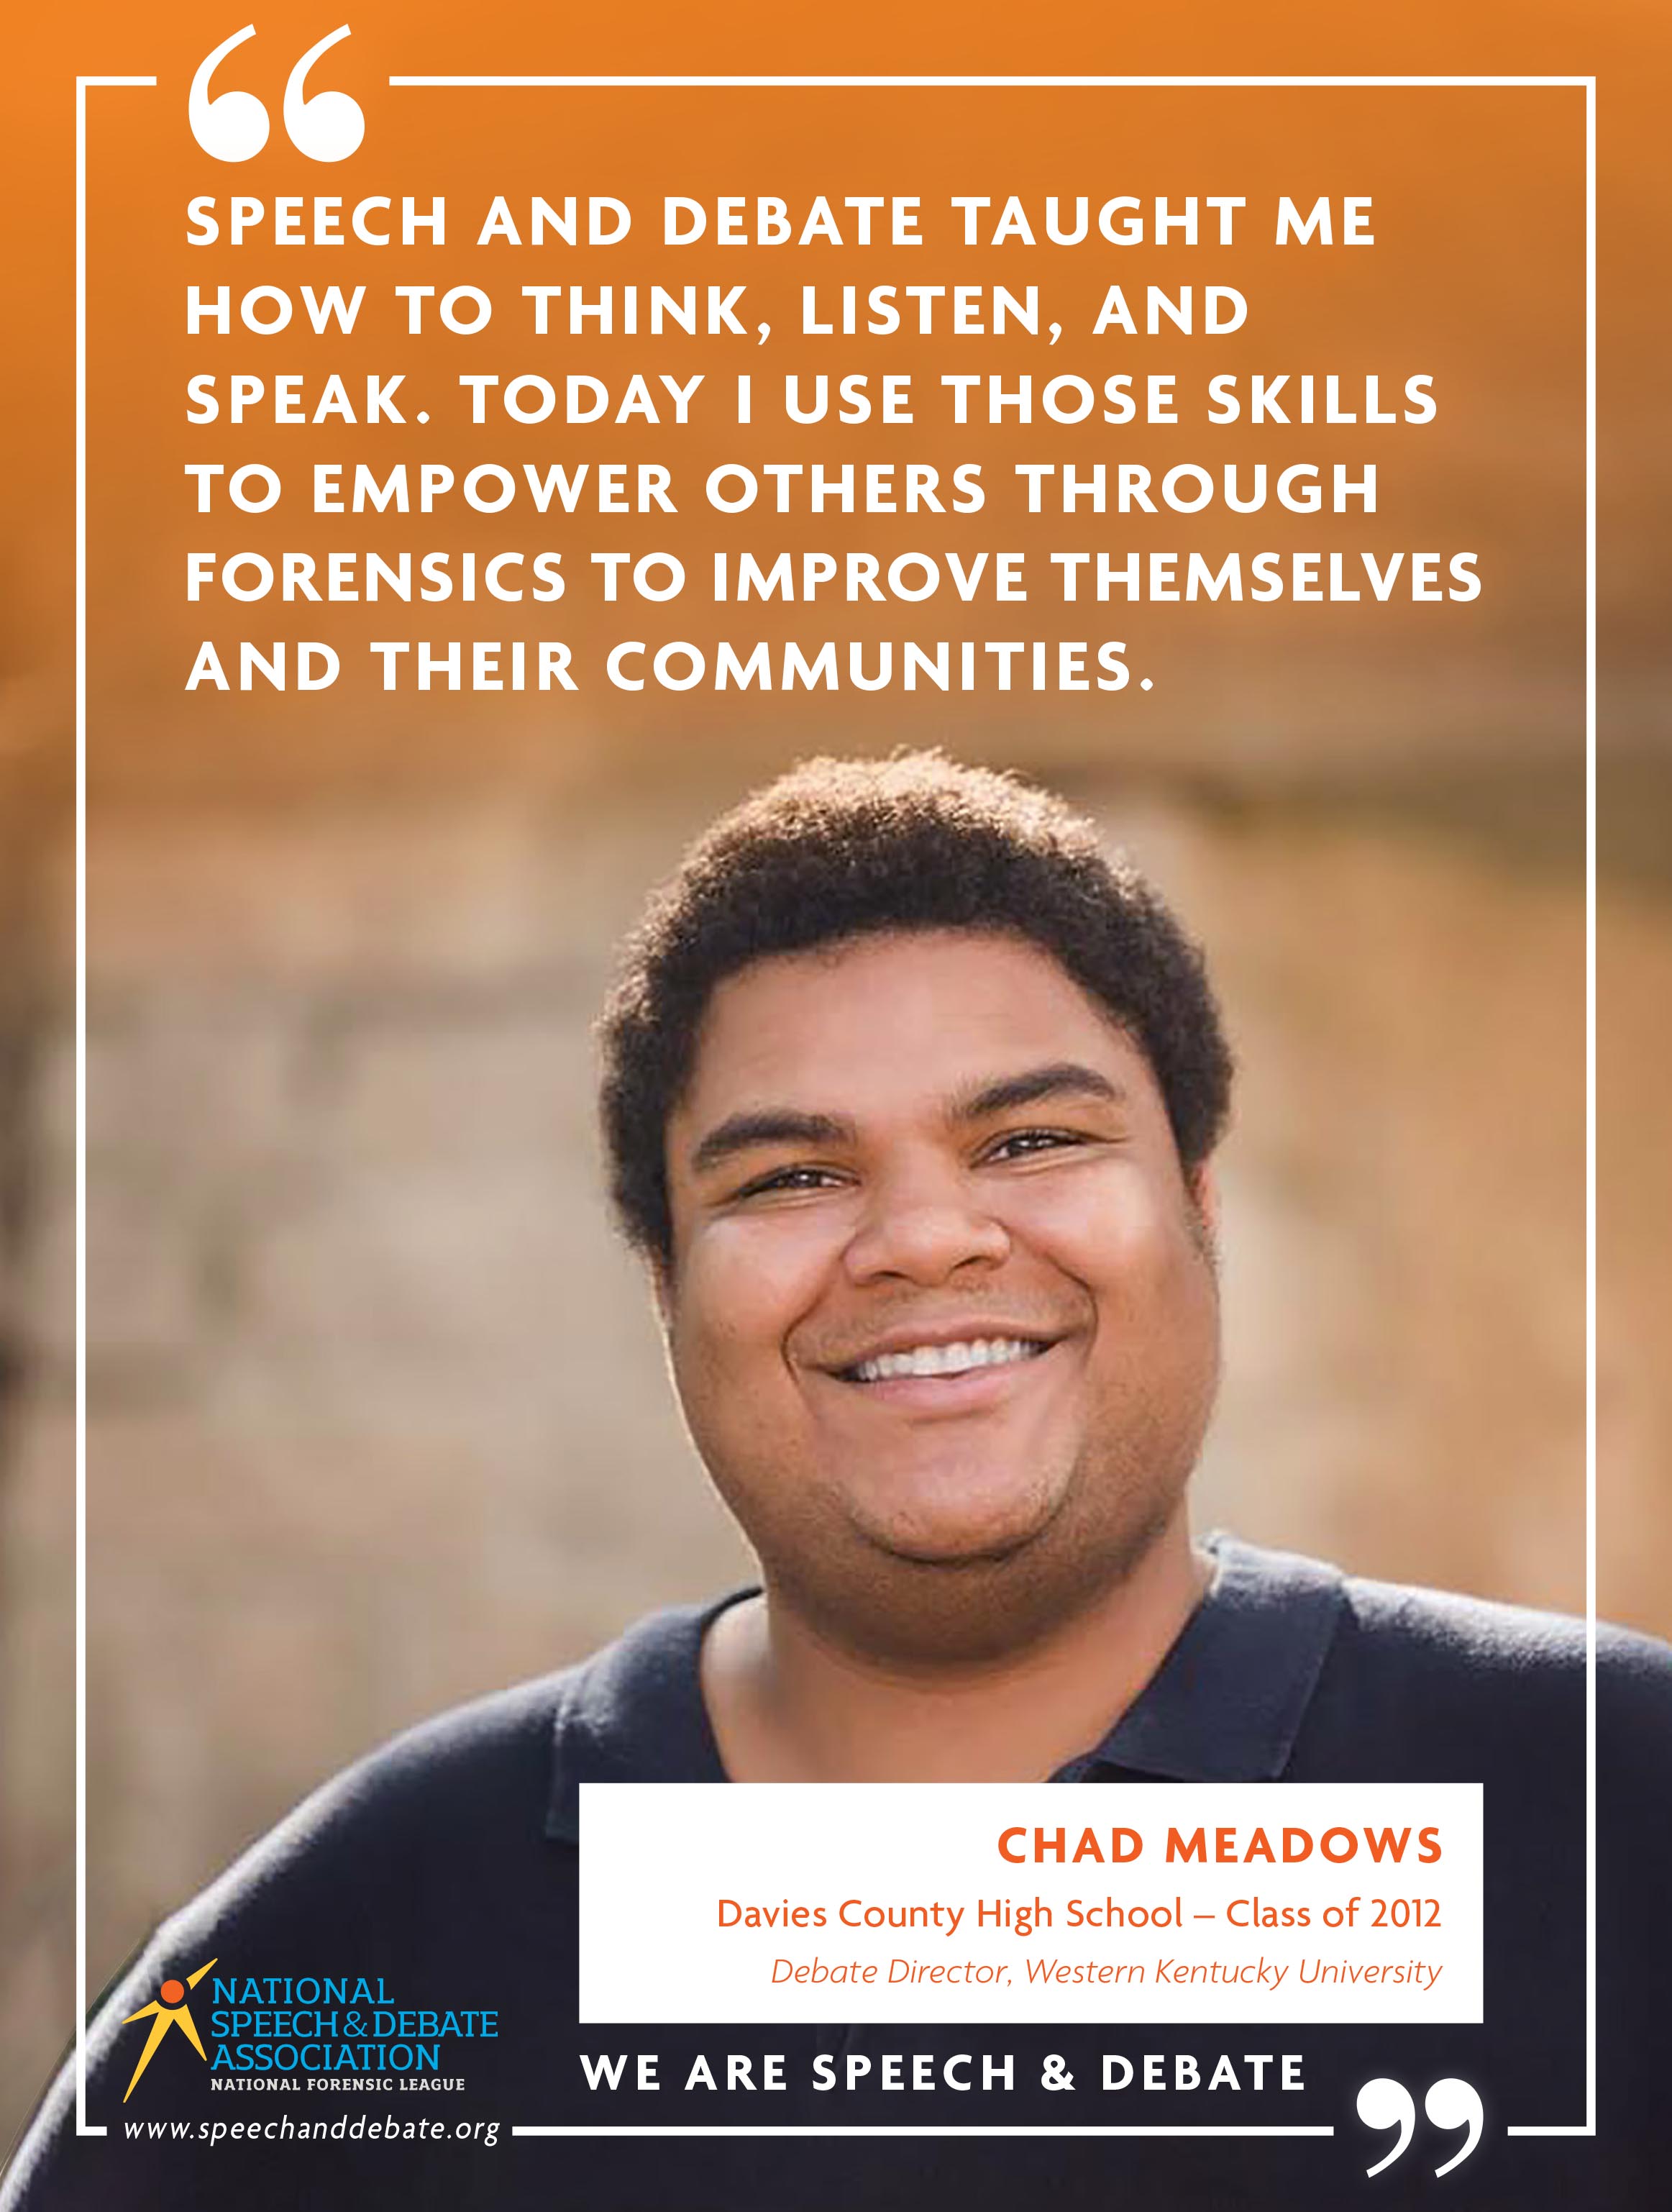 SPEECH AND DEBATE TAUGHT ME TO HOW TO THINK, LISTEN, AND SPEAK. TODAY I USE THOSE SKILLS TO EMPOWER OTHERS THROUGH FORENSICS TO IMPROVE THEMSELVES AND THEIR COMMUNITIES. - Chad Meadows